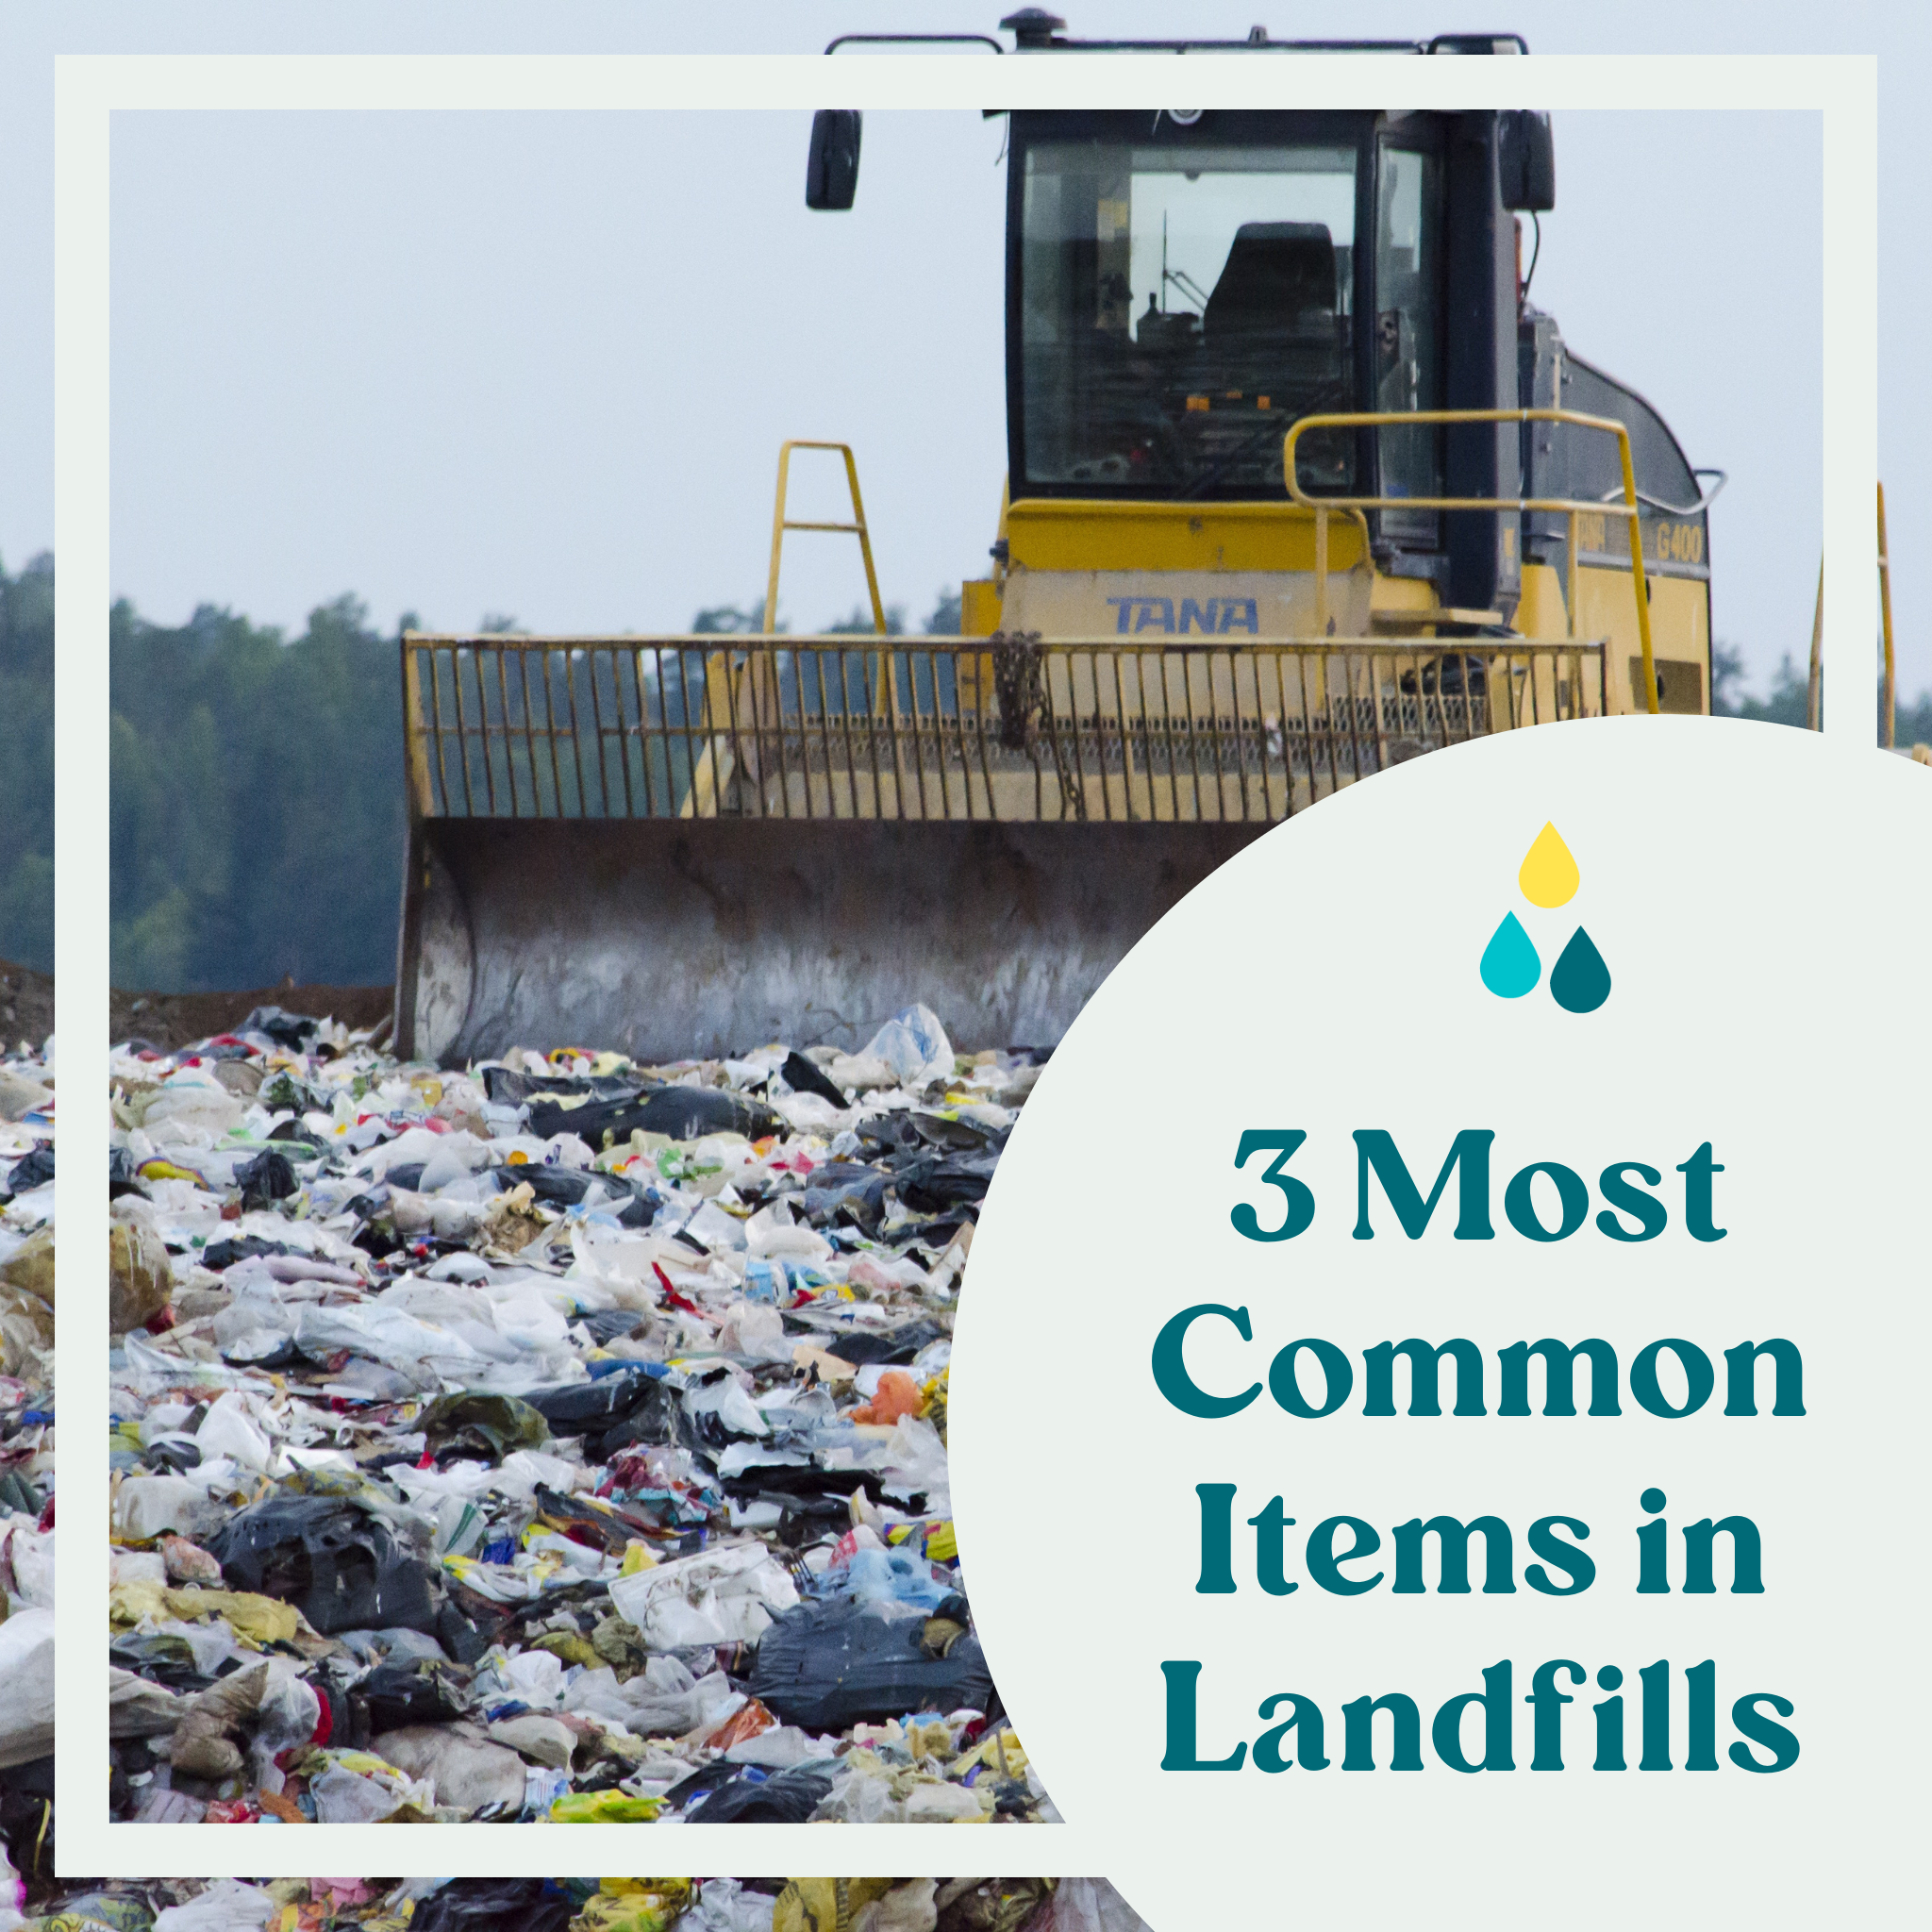 The 3 Most Common Items in Landfills